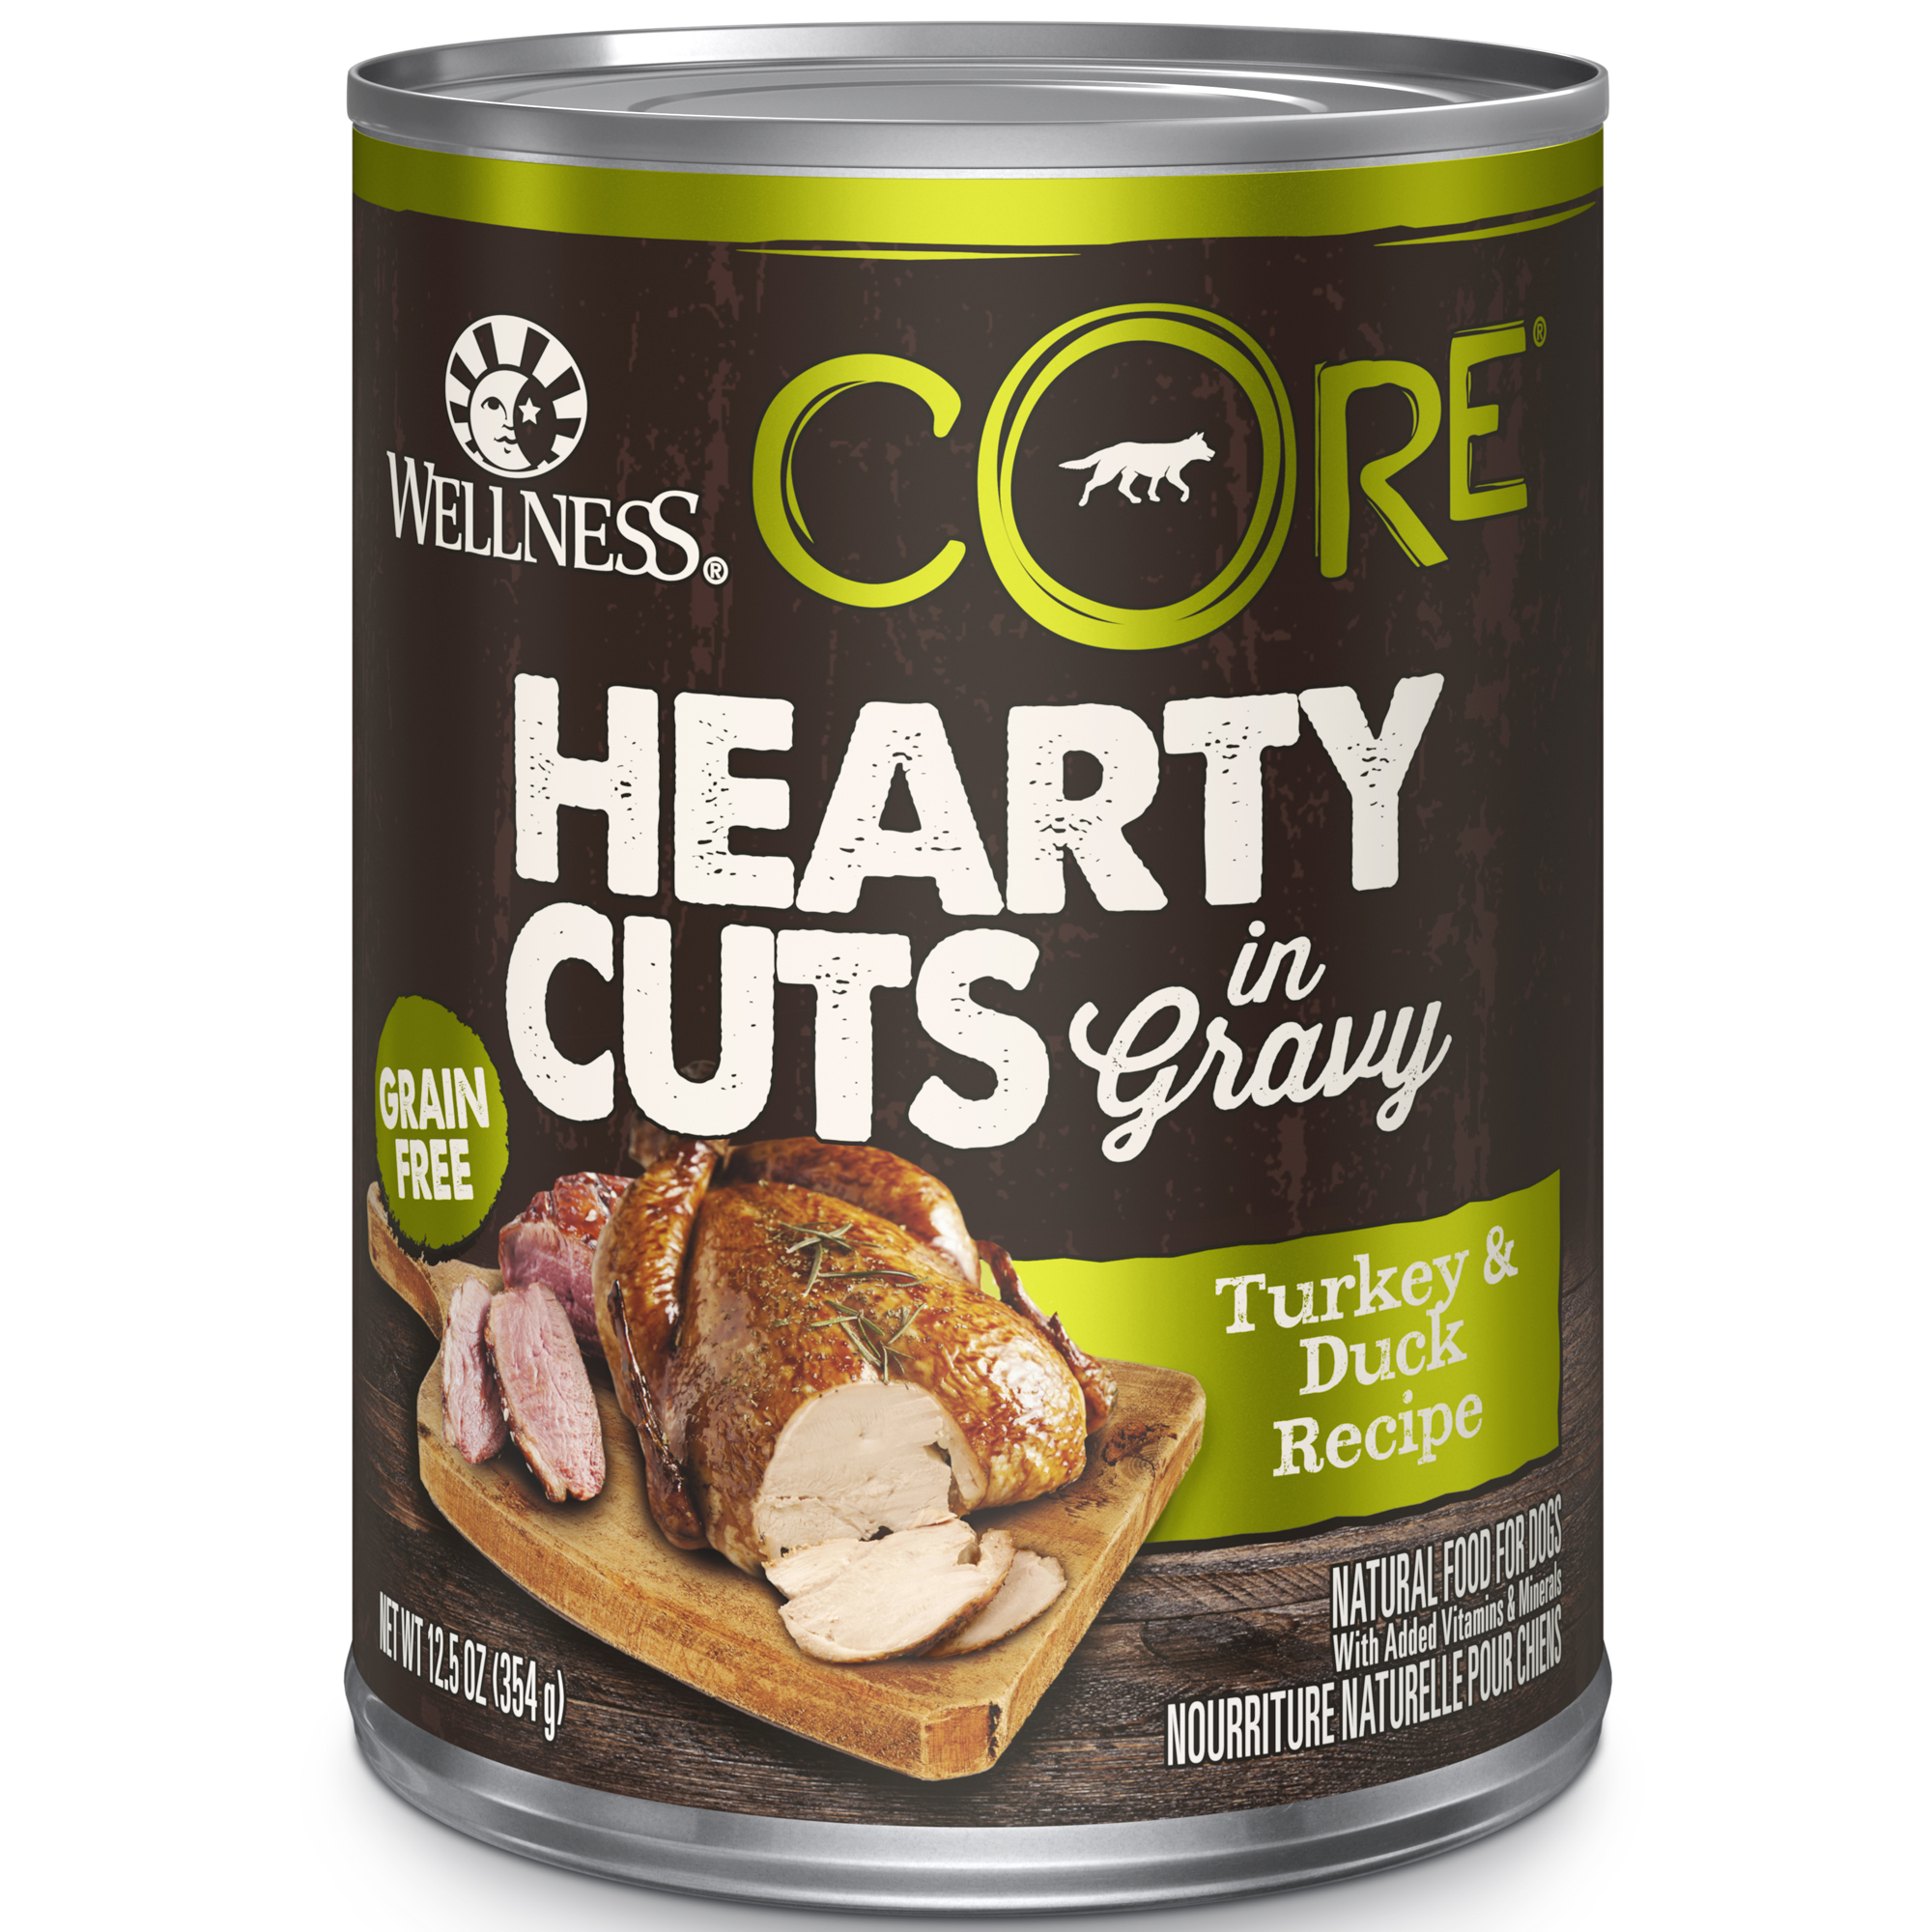 Wellness CORE Hearty Cuts Natural Wet Grain Free Canned Dog Food, Turkey & Duck, 12.5-Ounce Can (Pack of 12) - image 1 of 7